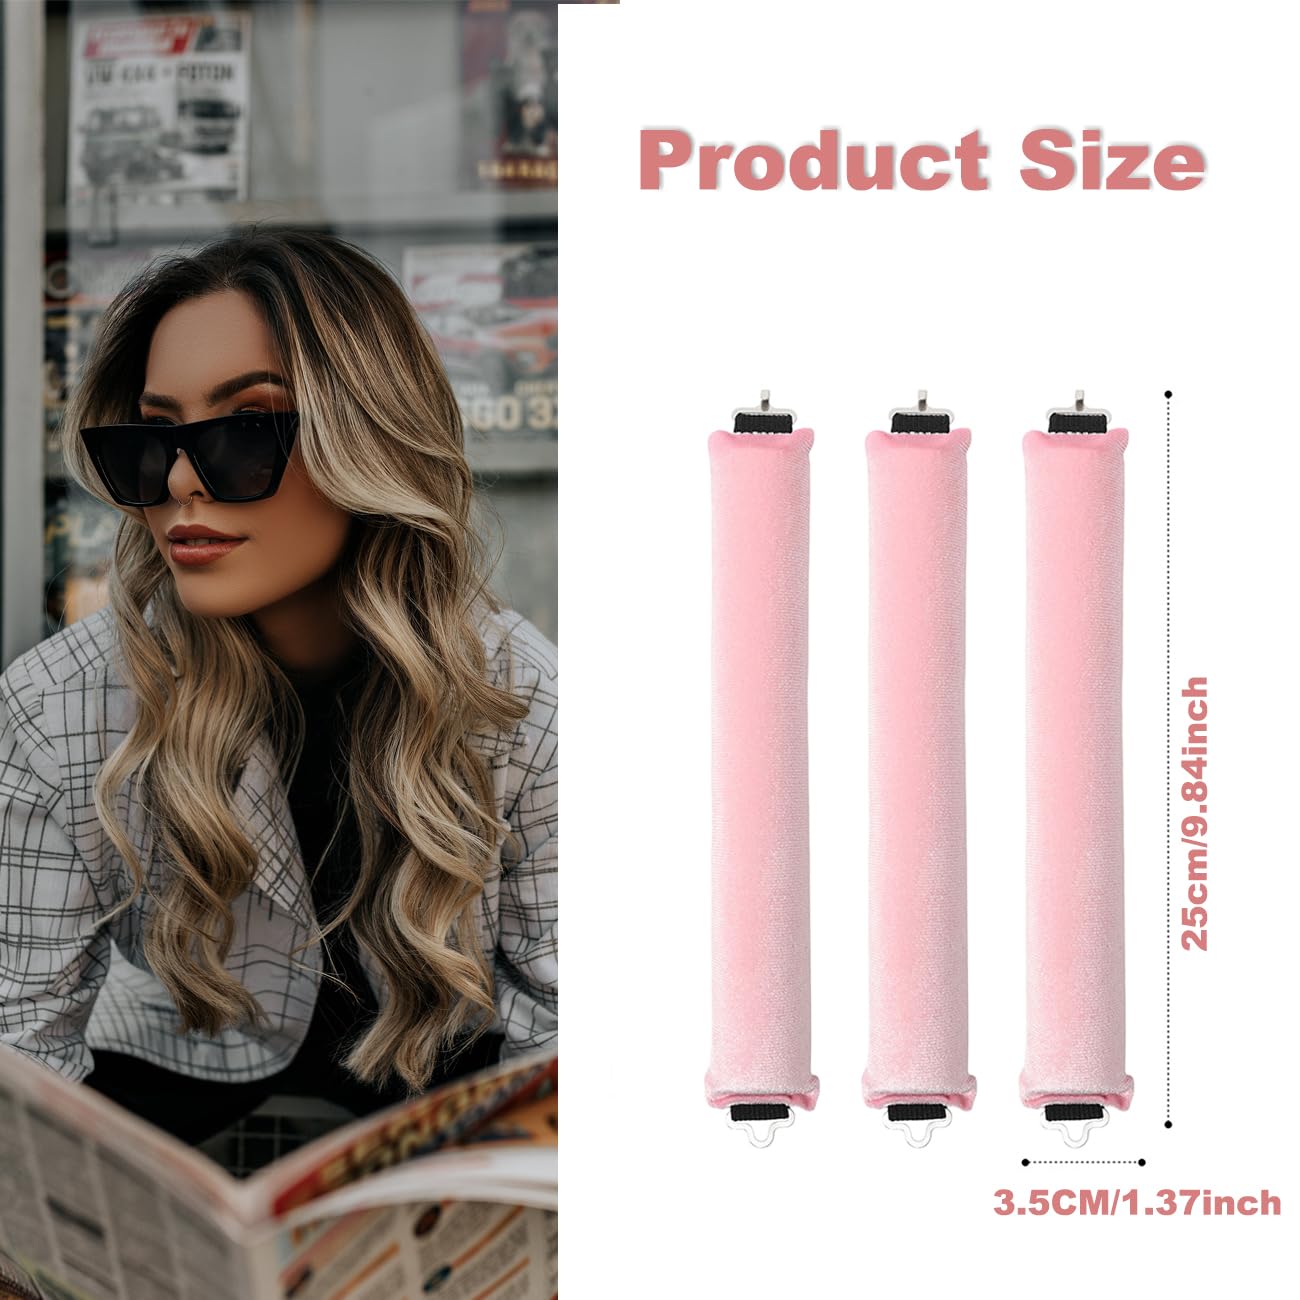 Heatless Hair Curler, Overnight Heatless Curls Blowout Rods for All Hair Types, Flexi Rods with Hook, Extra Thick Hair Curlers to Sleep in No Heat Curling Headband for Women Girls Long